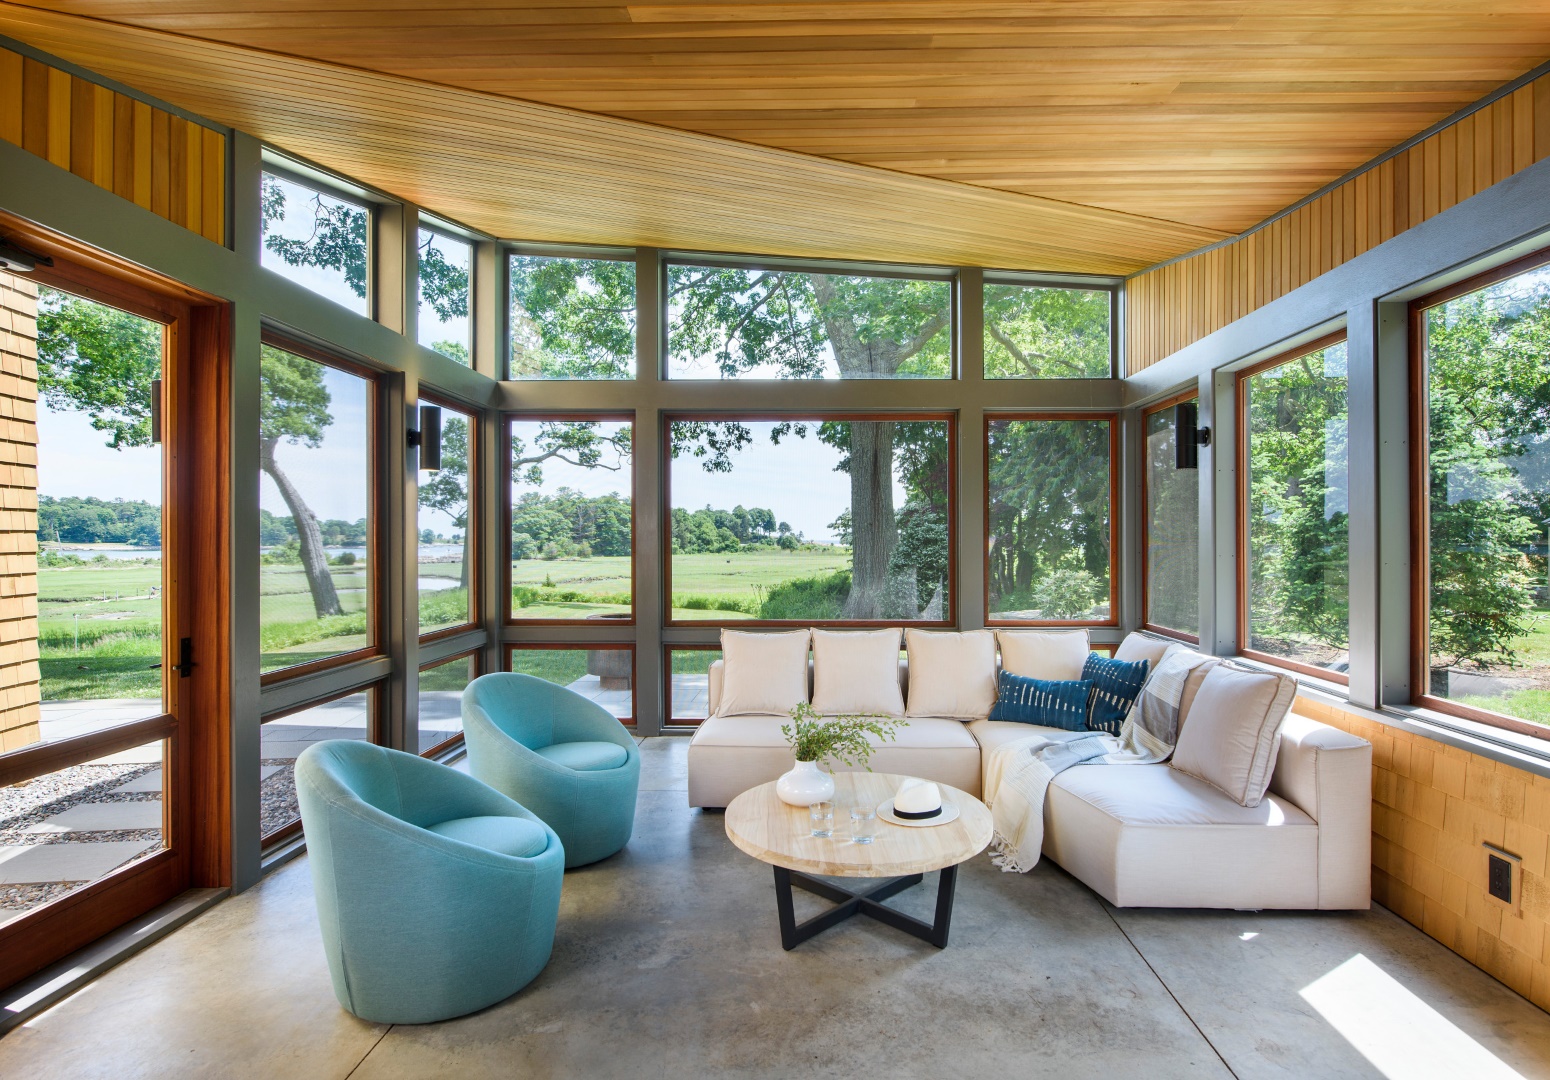 16 Contemporary Sunroom Designs That Will Make You Want to Stay Forever